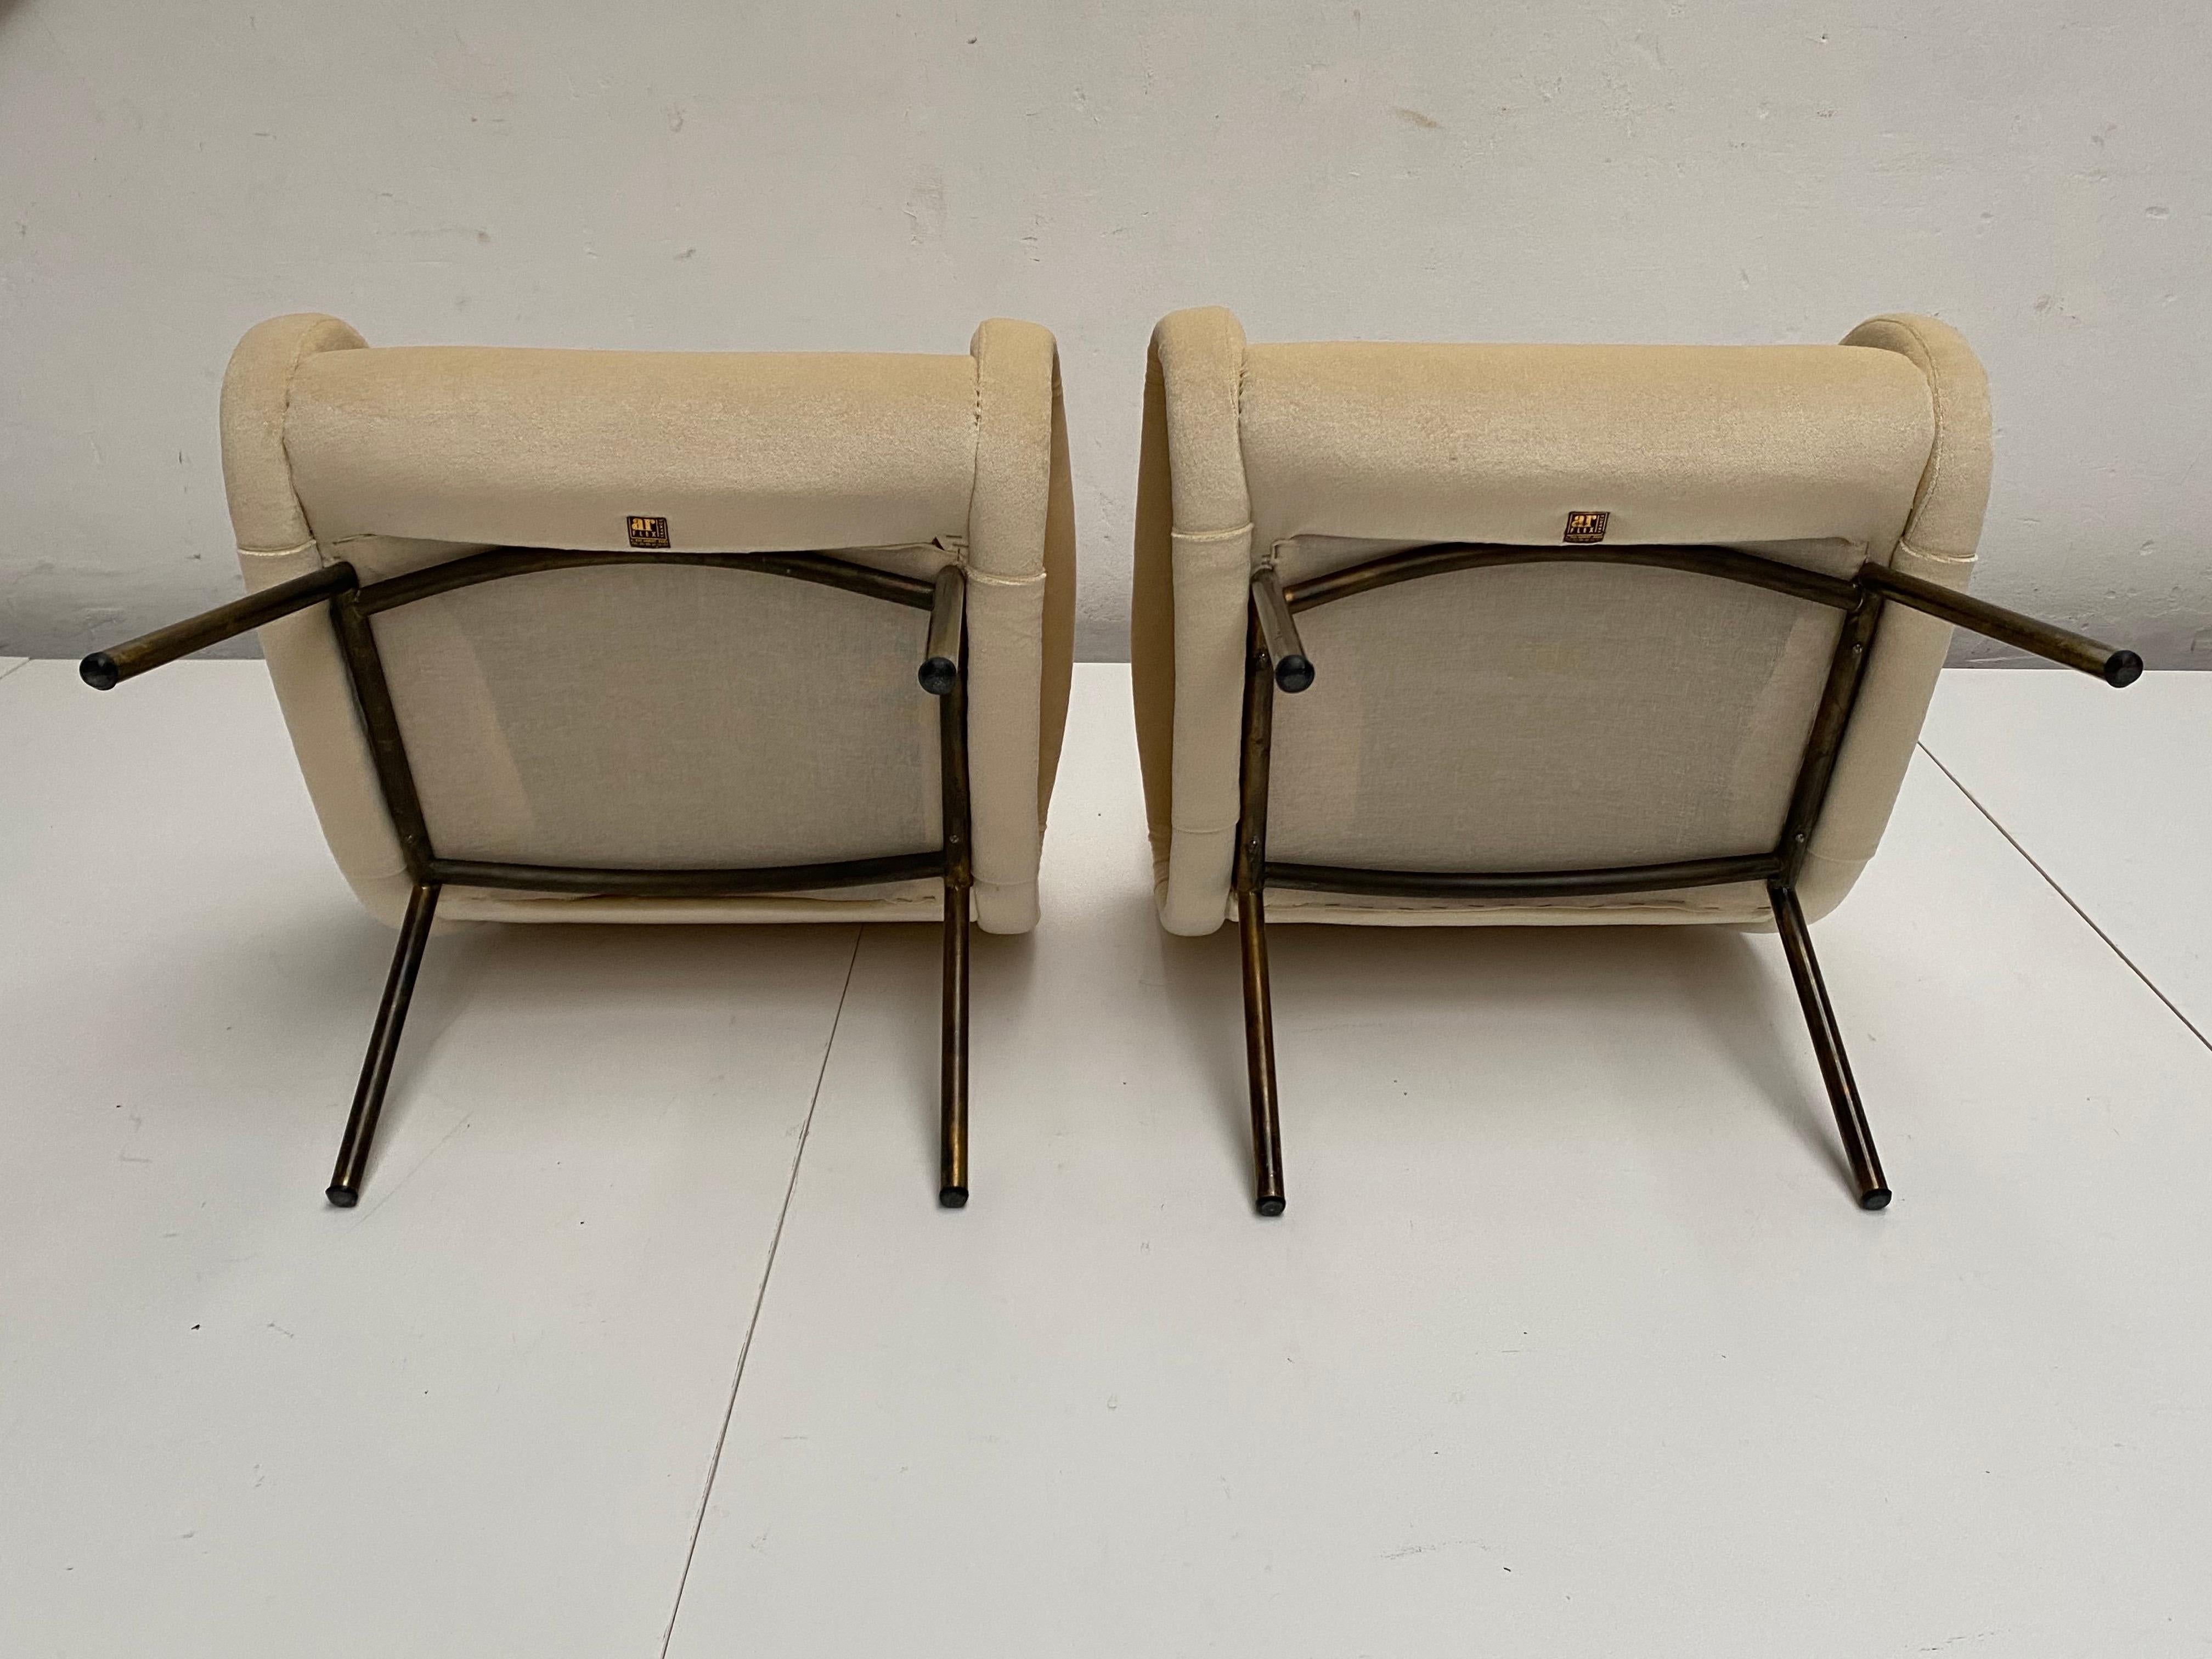 Zanuso Mohair 'Baby' Lounge Chairs, Early Wood Frames, Brass Legs, Arflex, 1951 For Sale 7